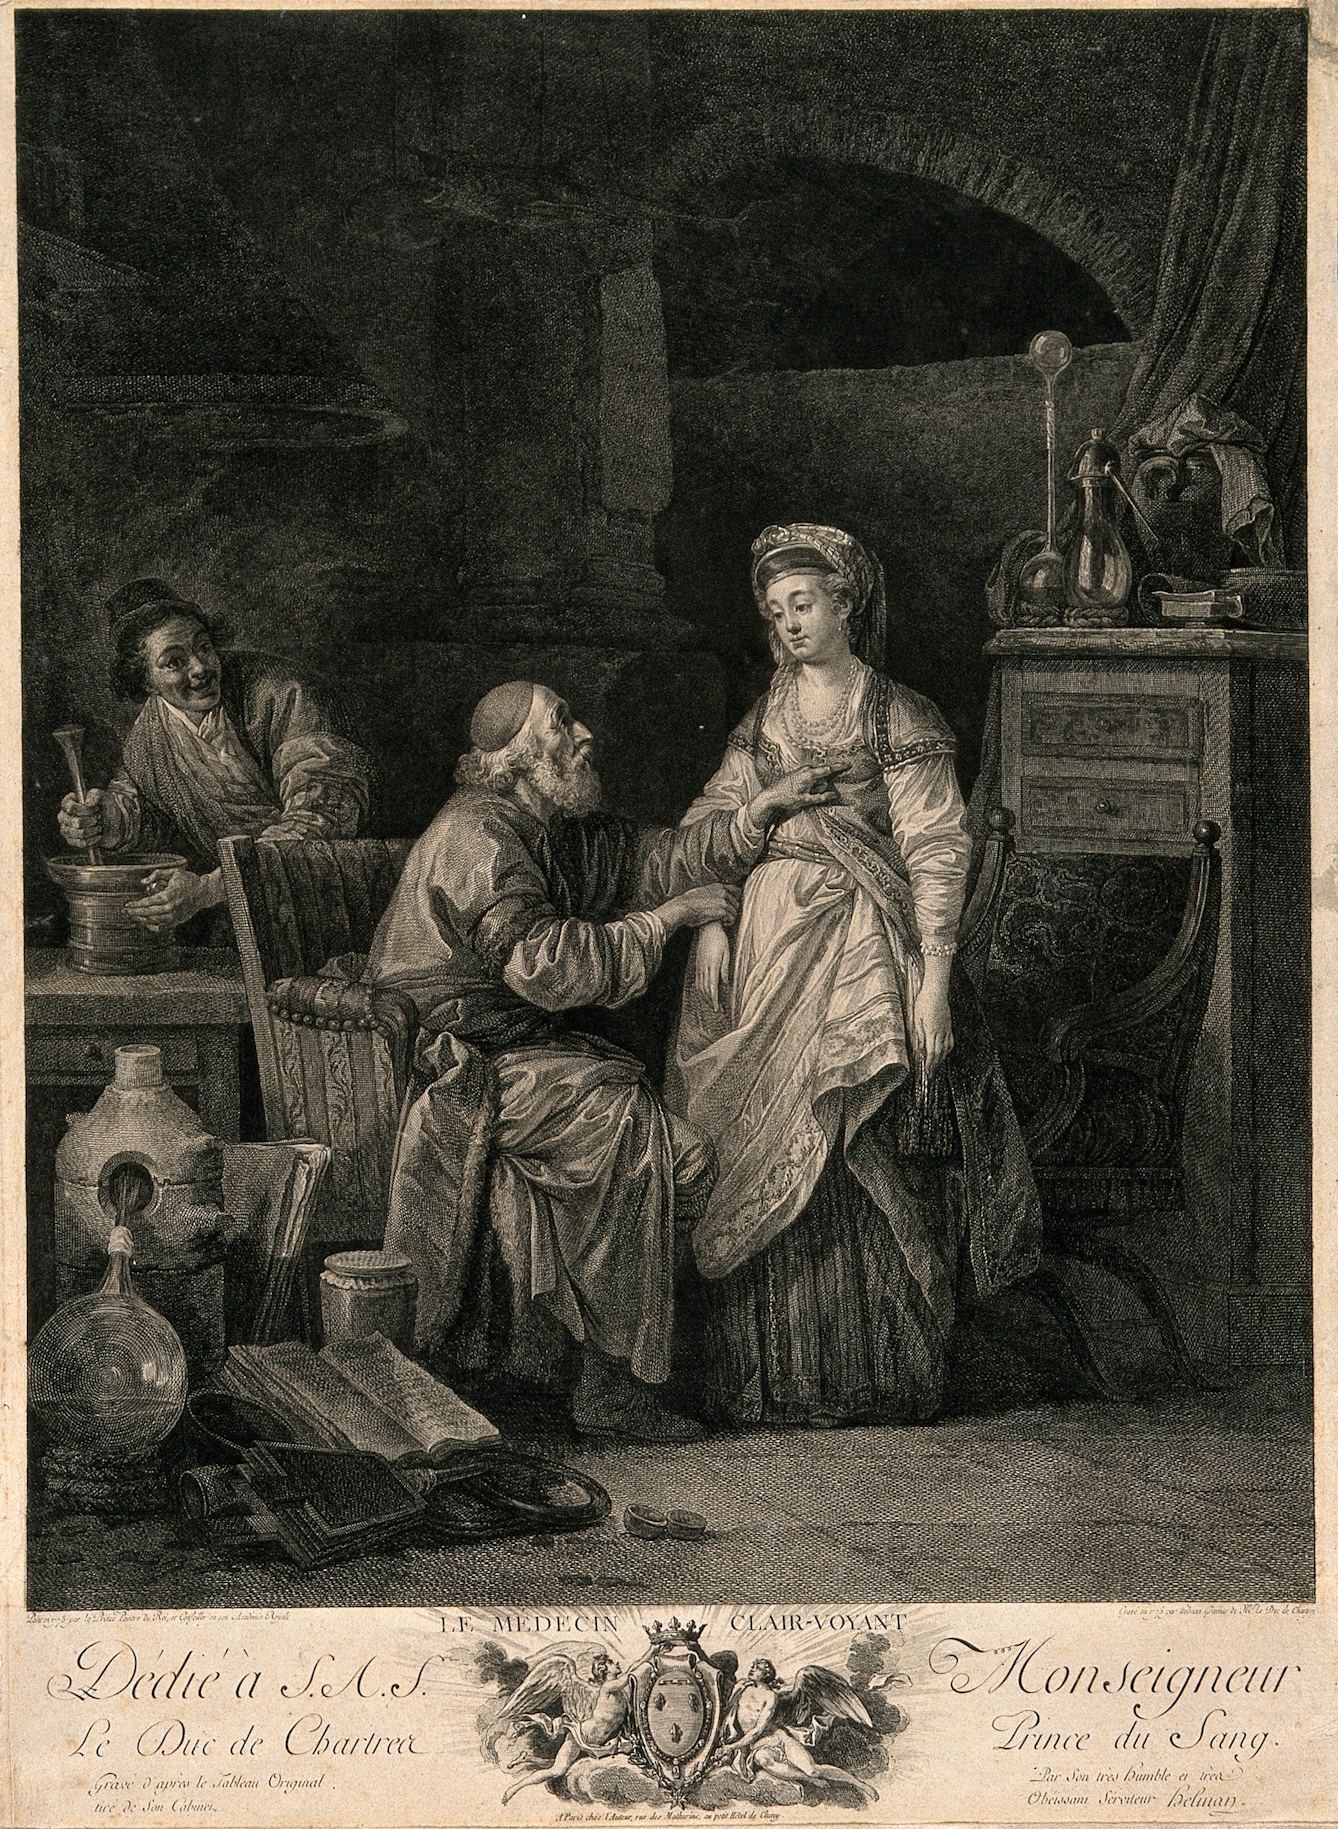 Black and white engraving showing an old physician taking a young woman's pulse and pointing to her heart, implying that she is suffering from lovesickness. In the background, the physicians' assistant is grinning and mixing a concoction.